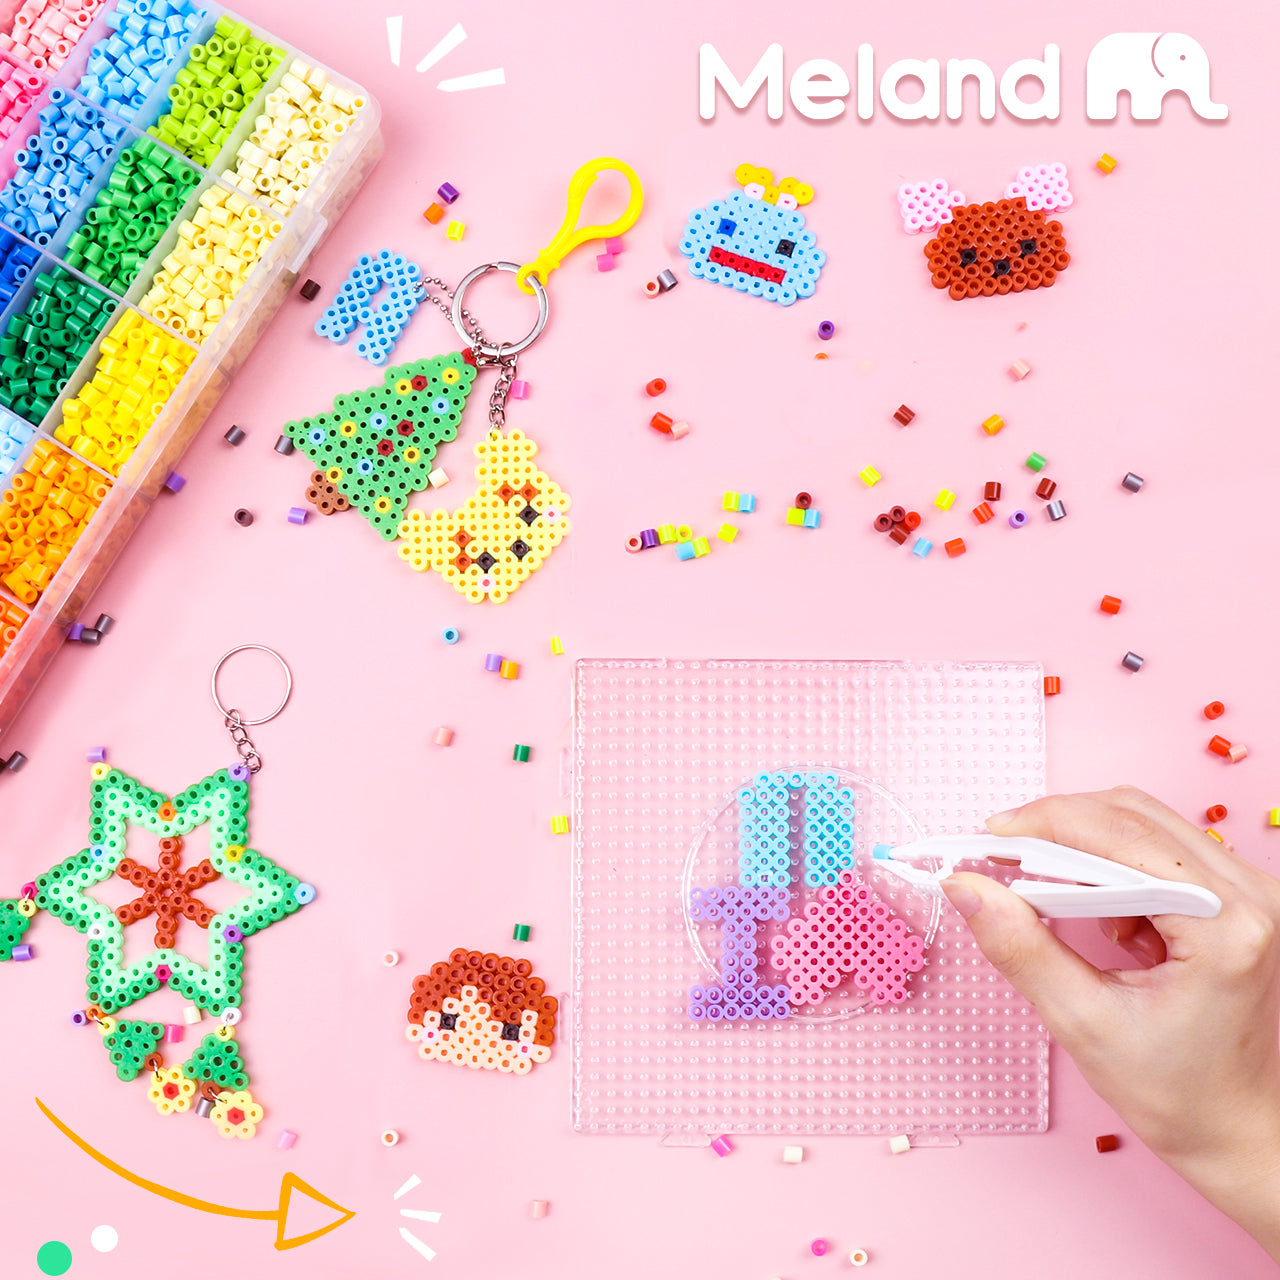 Meland Fuse Beads - 24000pcs Fuse Beads Kit for Kids, 24 Color 5MM Iron  Beads Set with 4 Fluorescence Color, 6 Pegboards - Craft Kits Gifts for